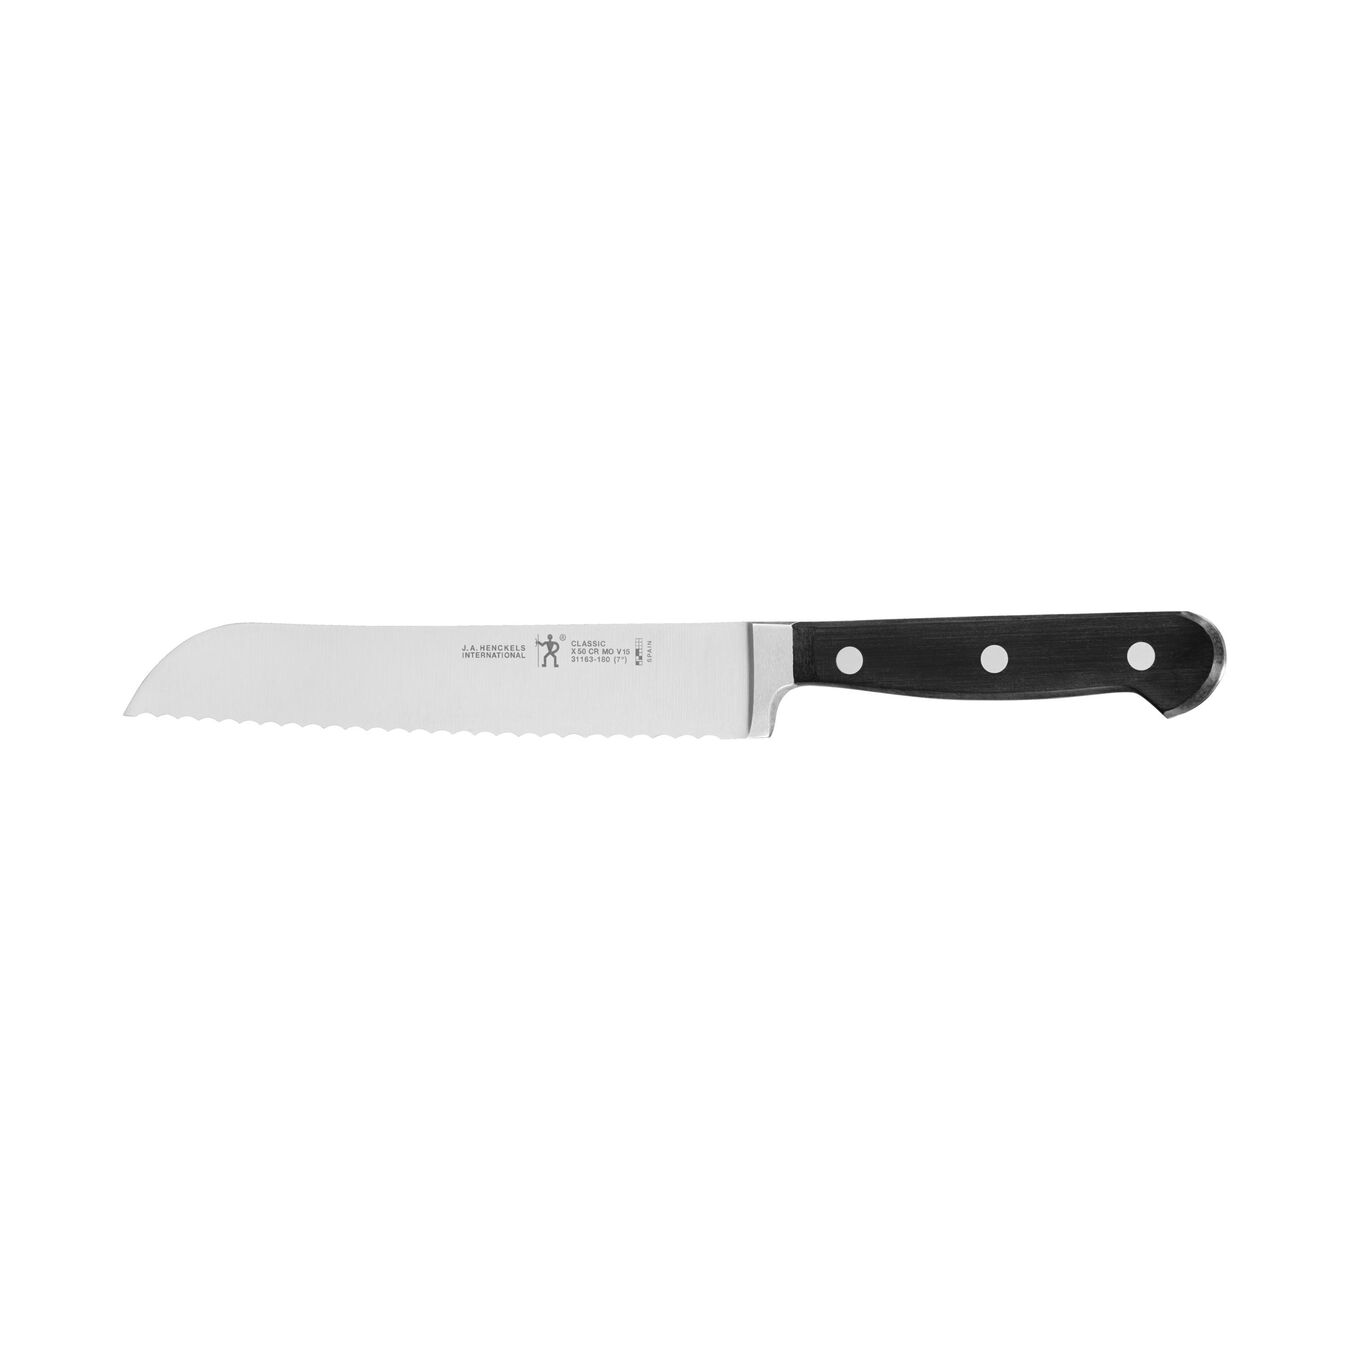 7-inch, Bread knife,,large 1